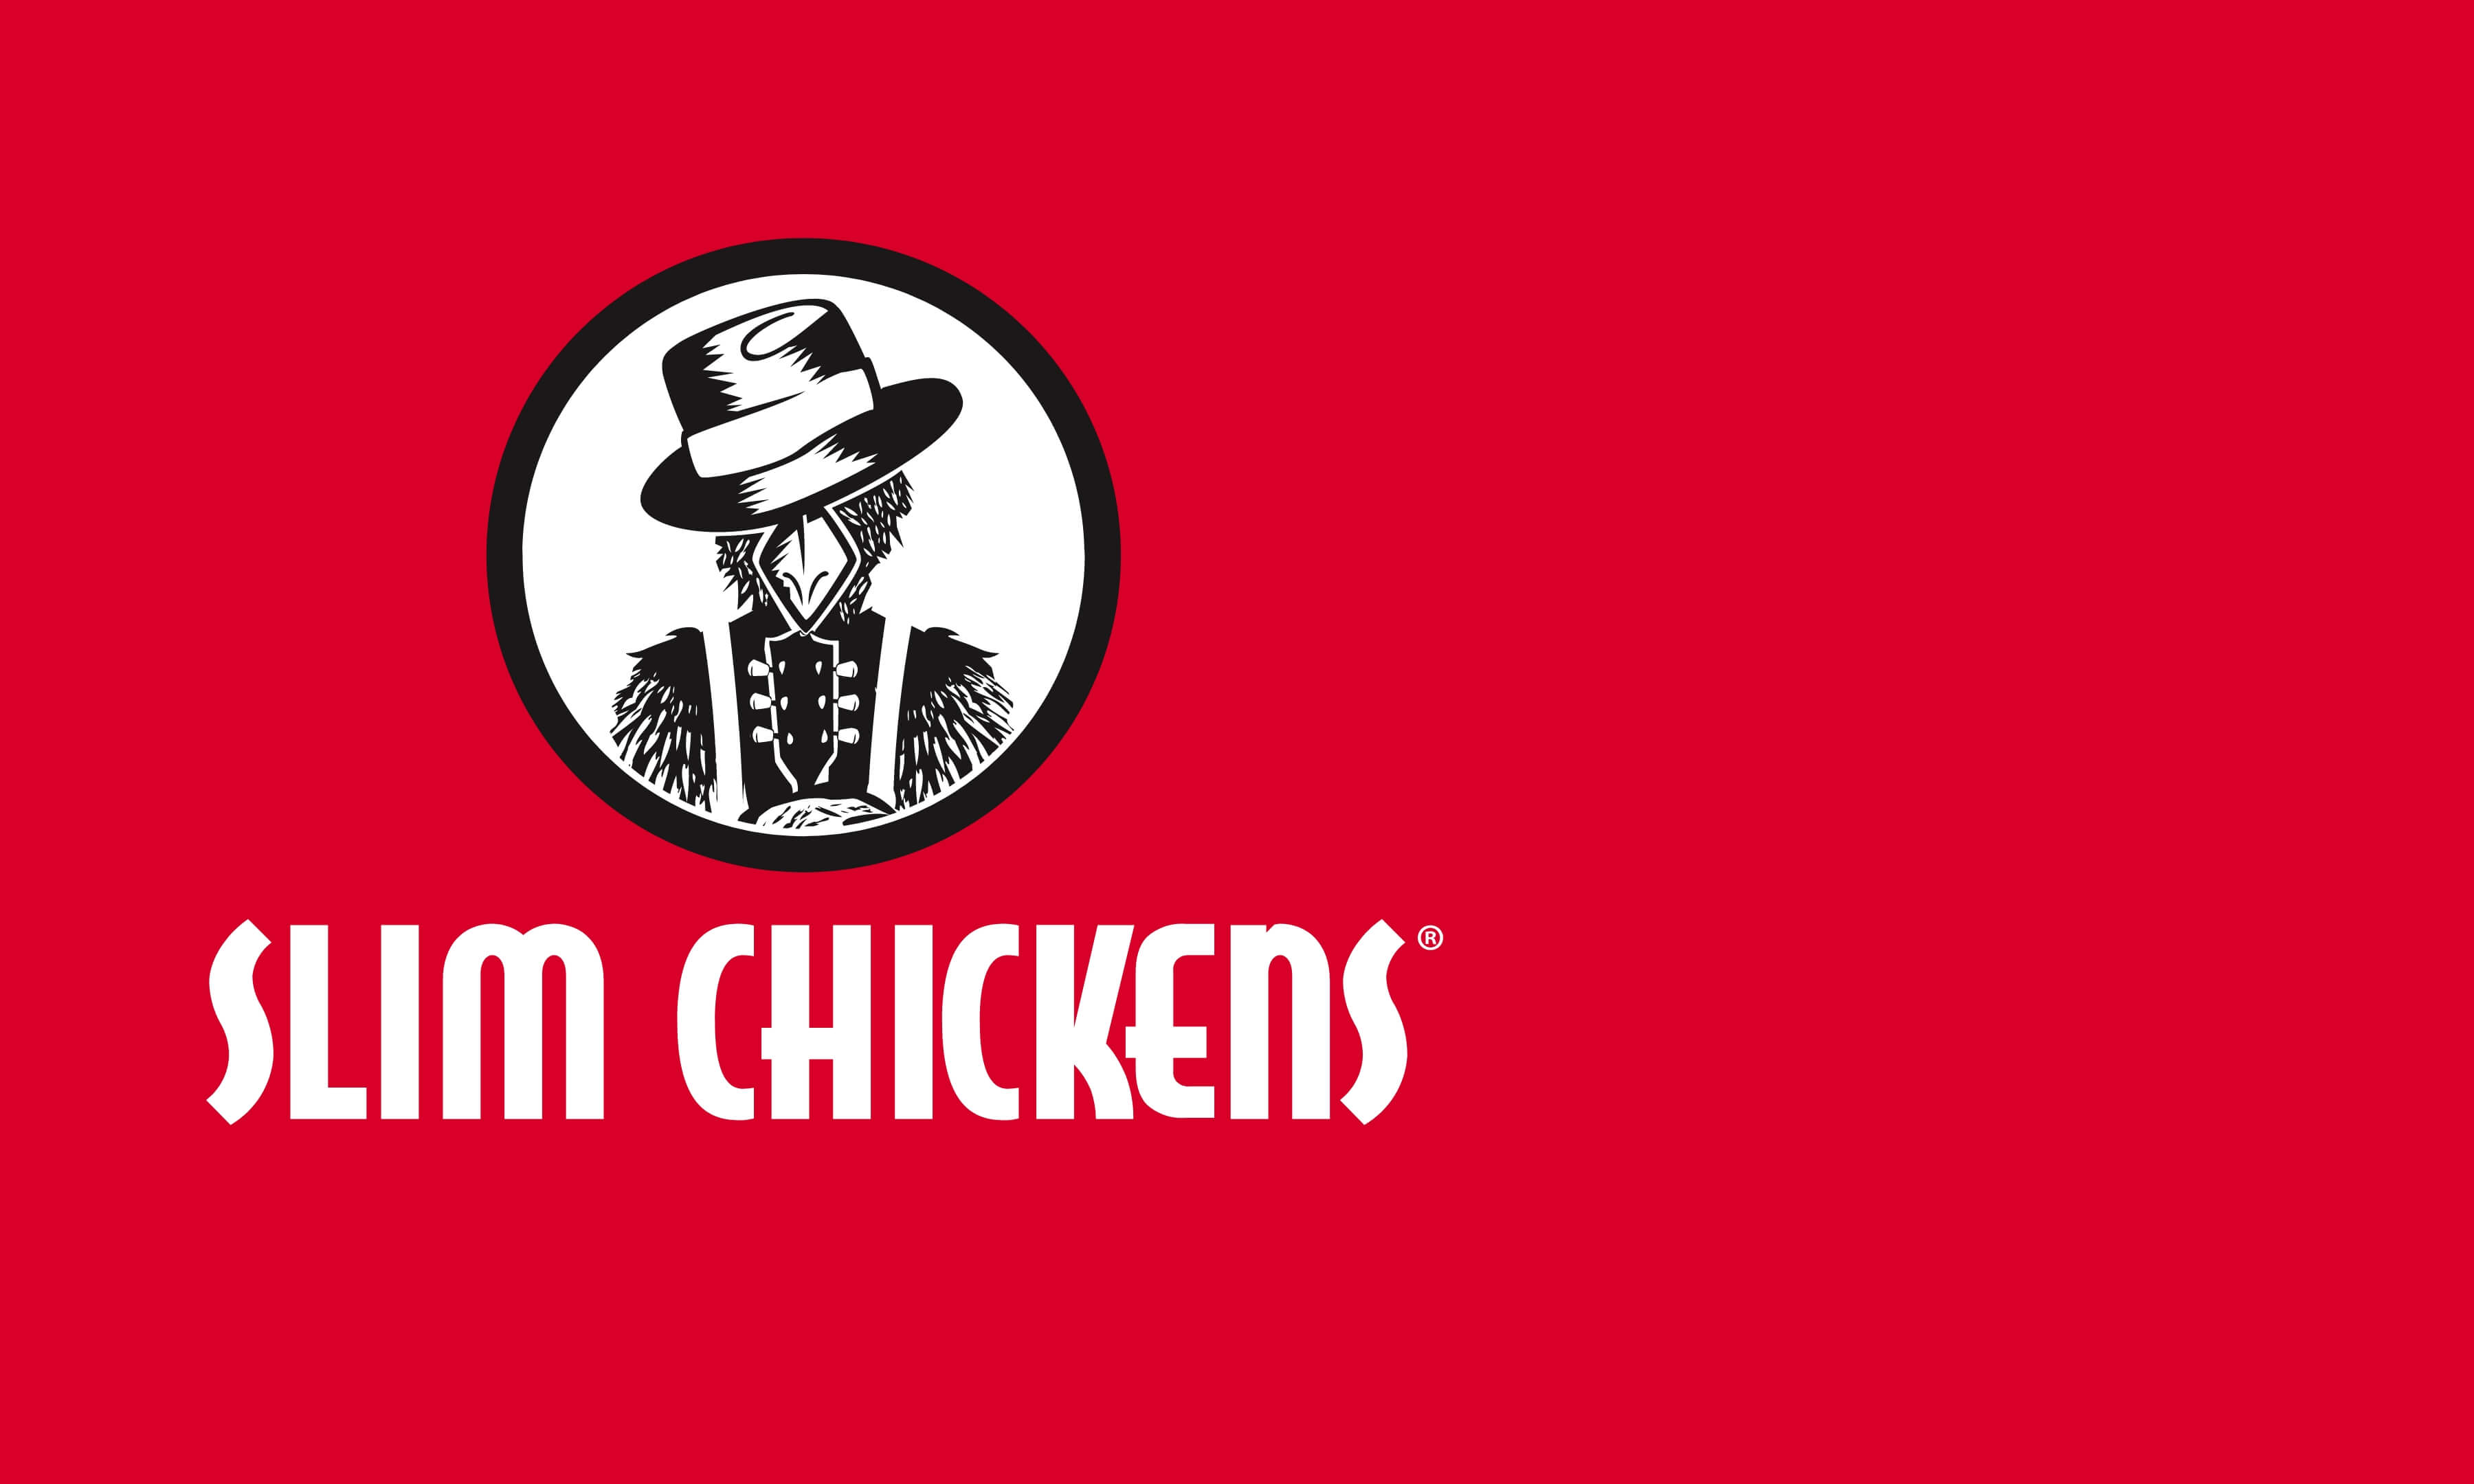 Slim Chickens logo on a red background